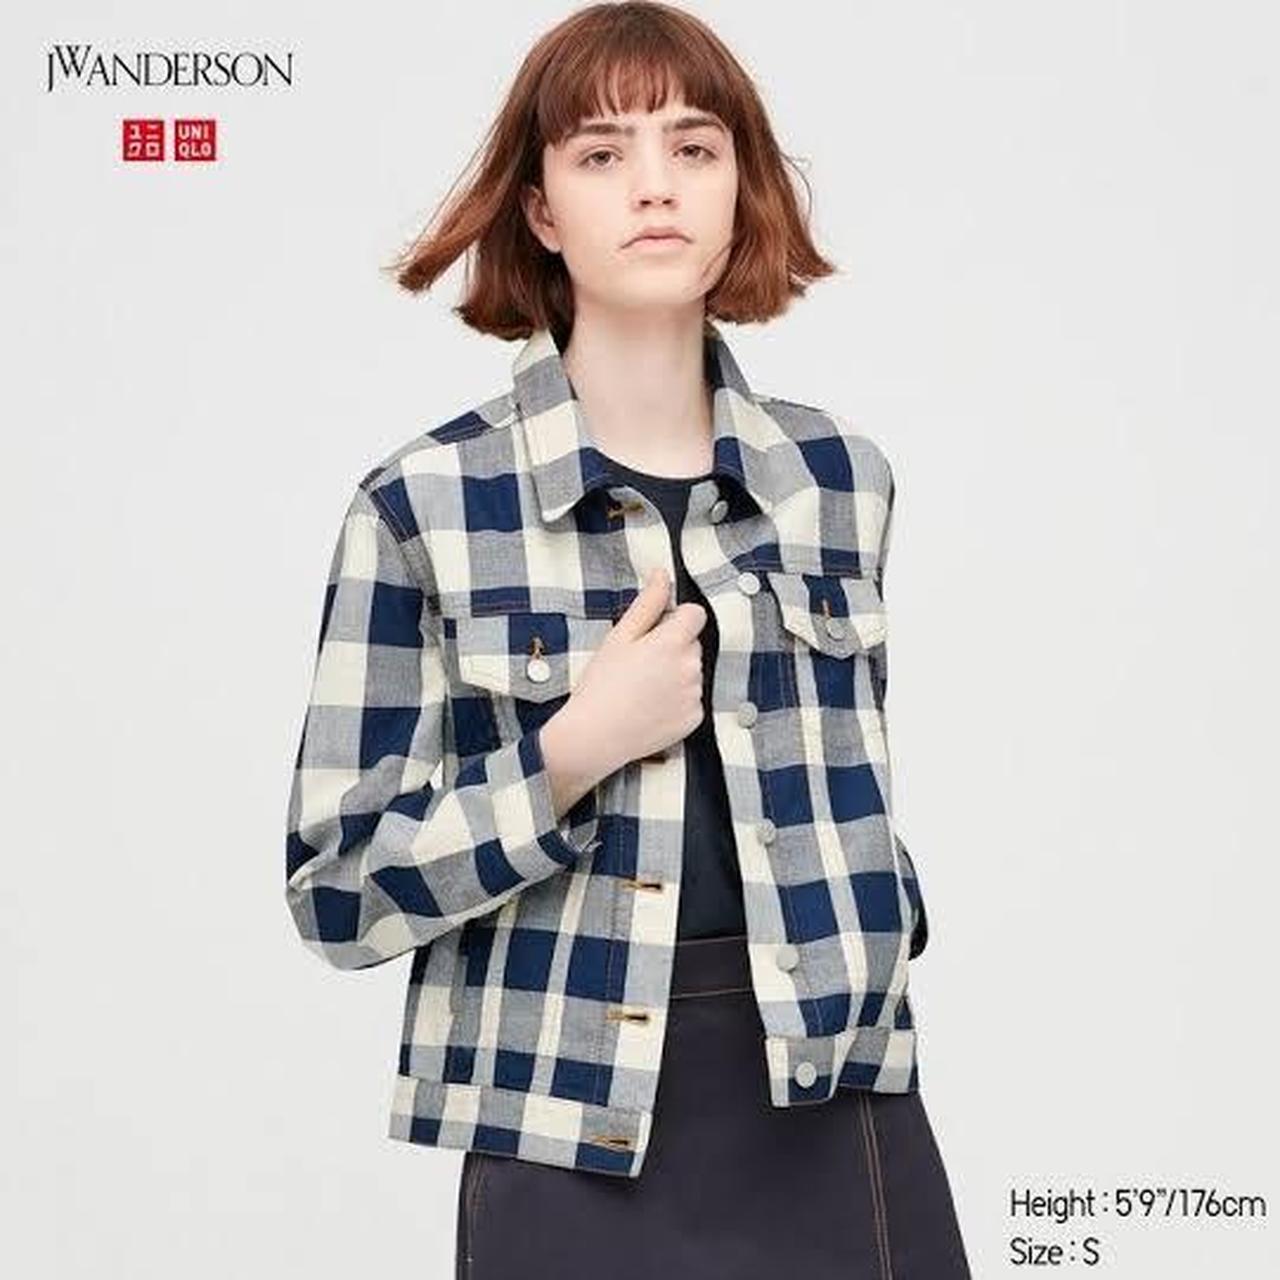 jw anderson x uniqlo collab a very cute oversized... - Depop